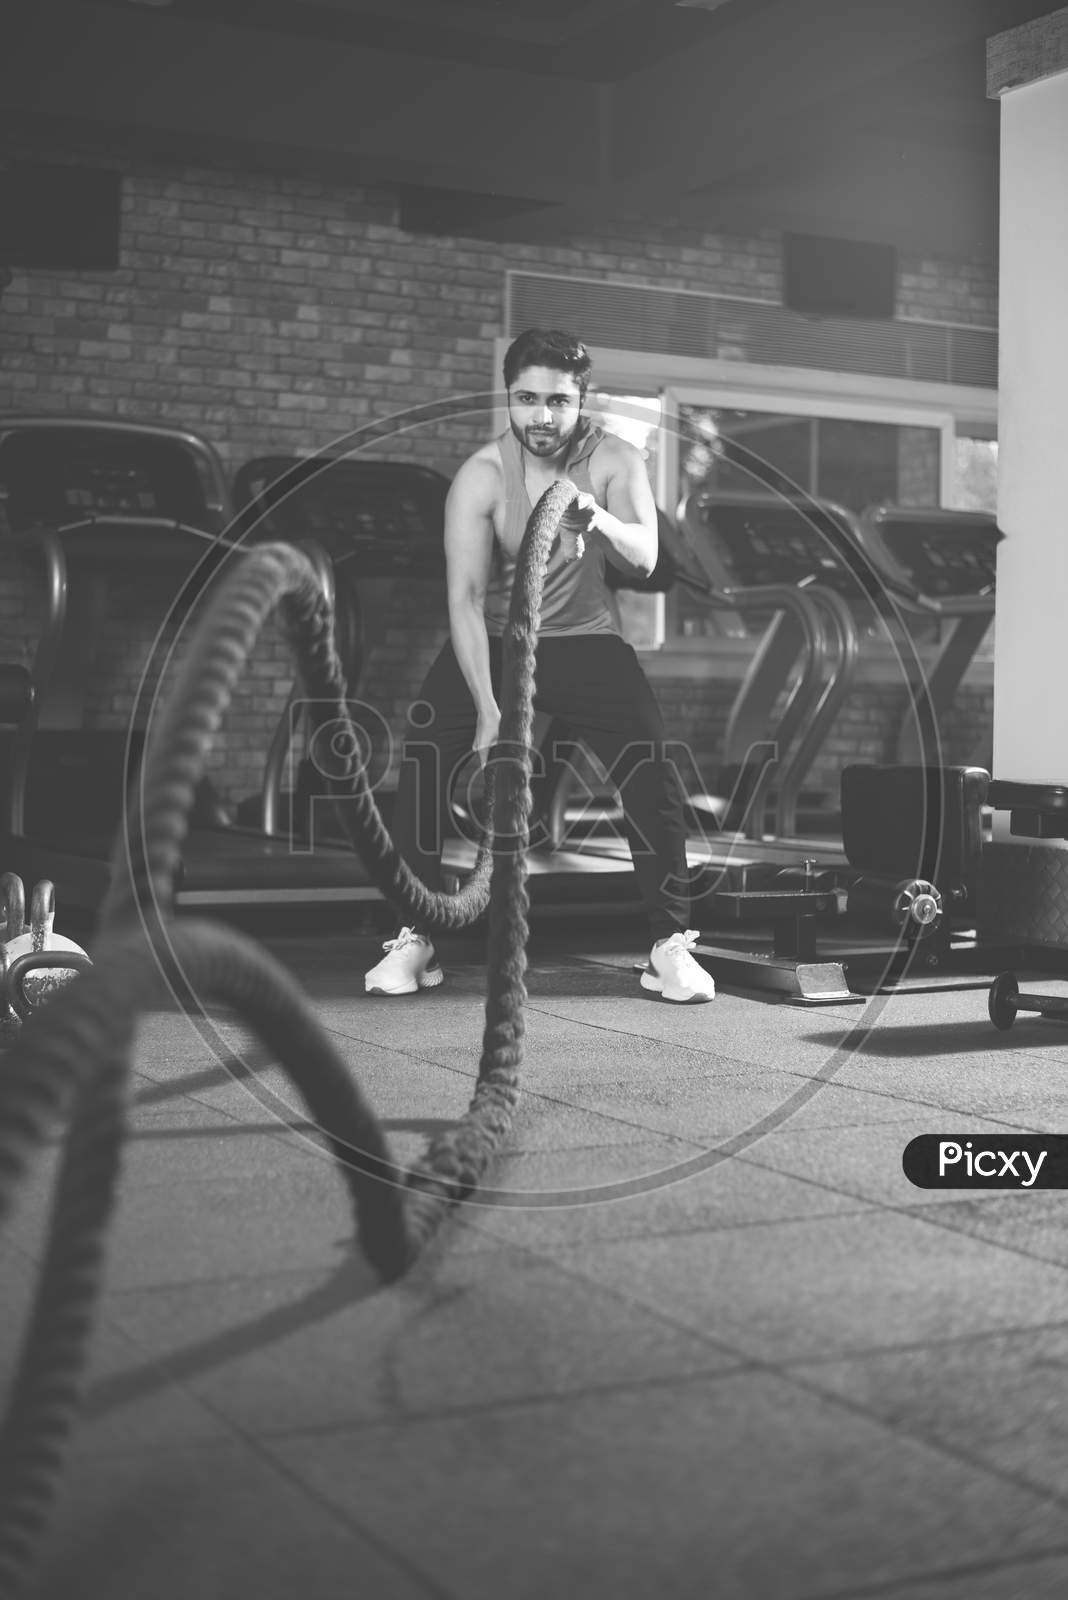 Indian Asian Young Man Exercising With Battle Rope In The Gym